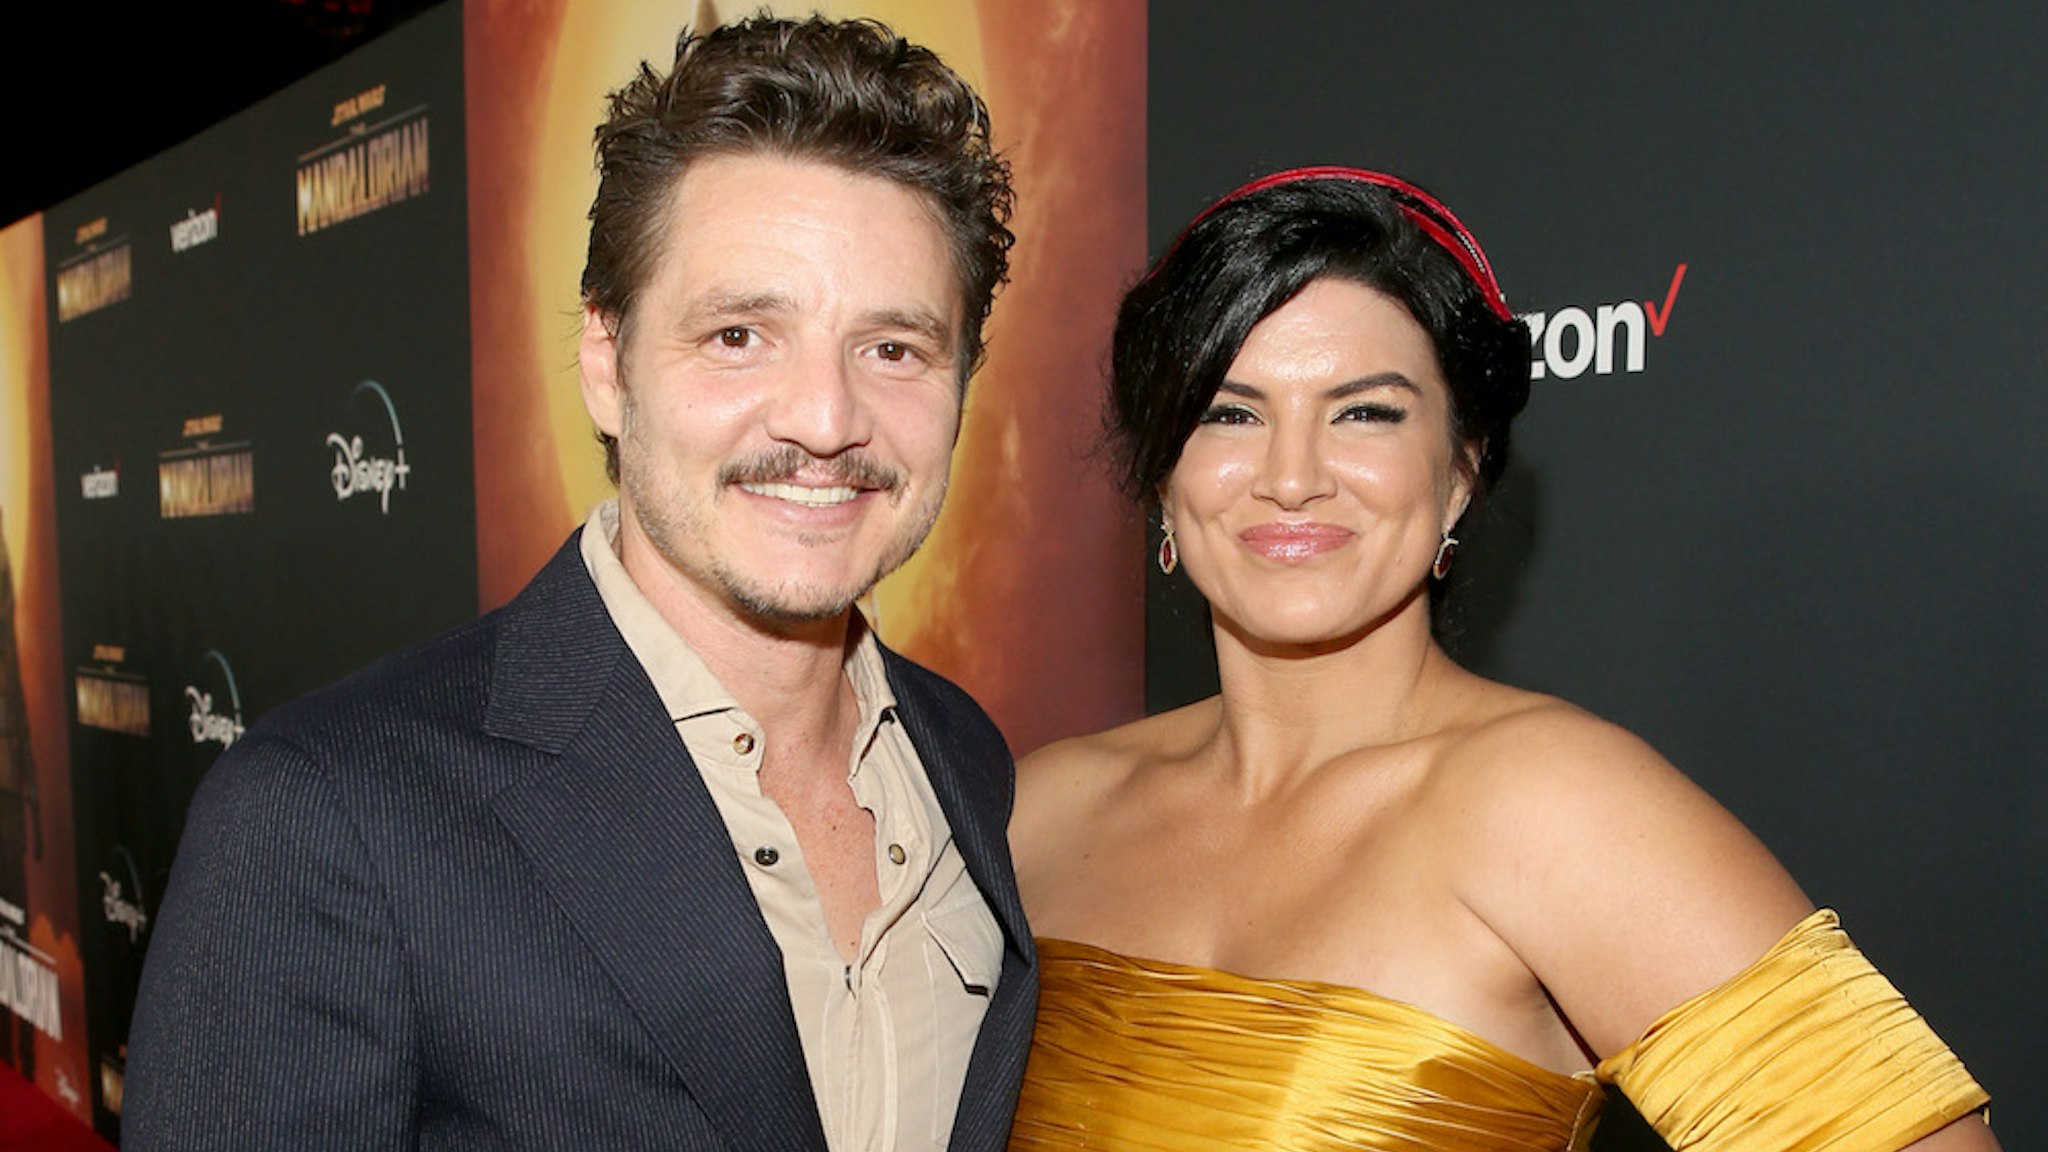 Pedro Pascal and Gina Carano arrive at the premiere of Lucasfilm's first-ever, live-action series, "The Mandalorian," at the El Capitan Theatre in Hollywood, Calif. on November 13, 2019. "The Mandalorian" streams exclusively on Disney+. (Photo by Jesse Grant/Getty Images for Disney)